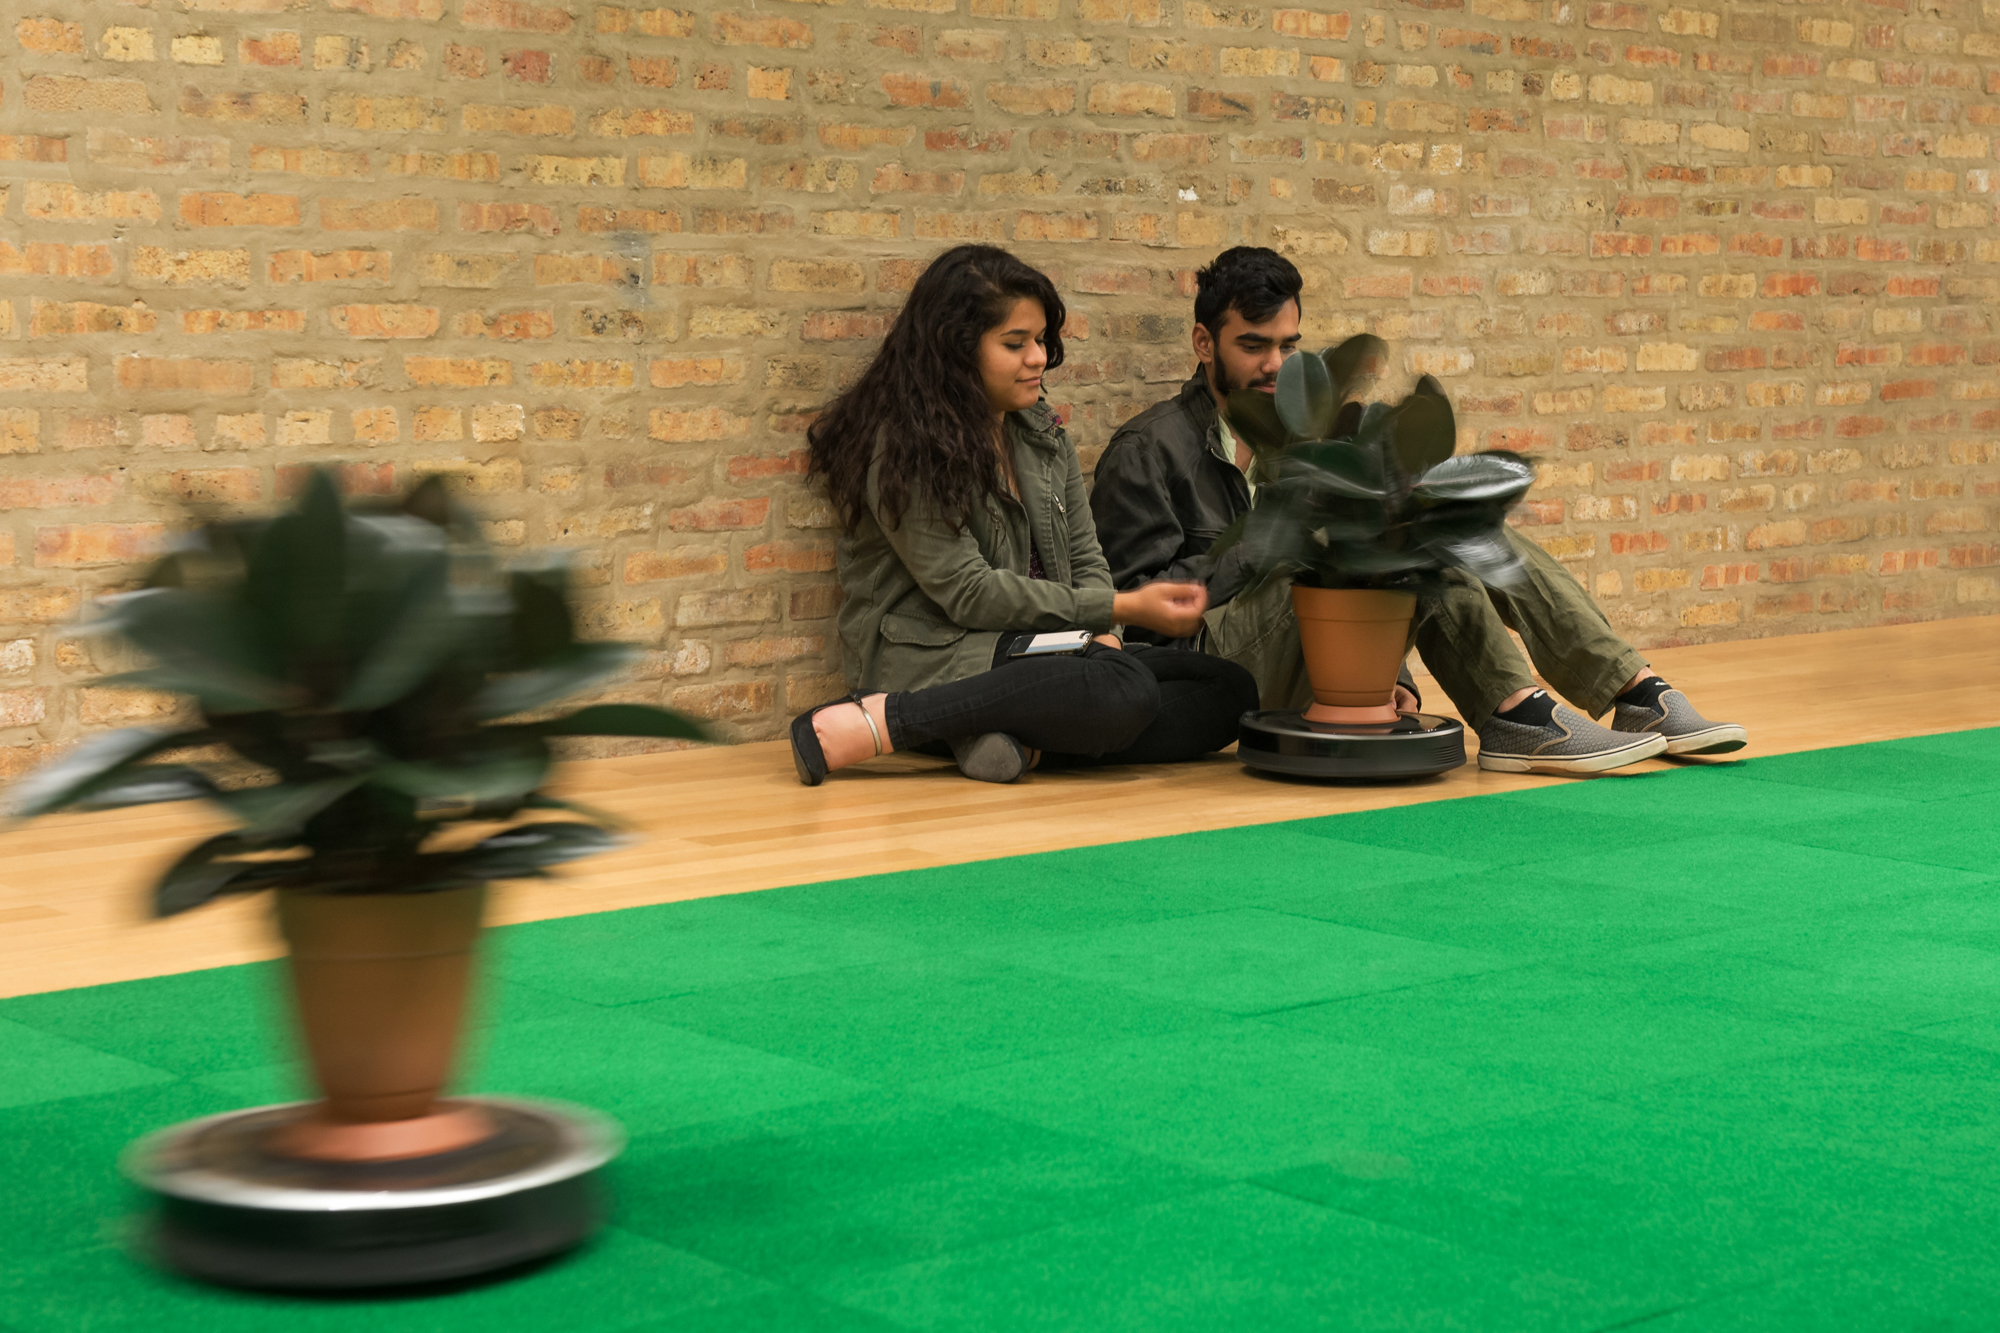 A young couple sits on the floor, leaning against an exposed brick wall, gently touching a potted rubber tree plant mounted on a Roomba vacuum that is brushing their knees, while another Roomba-mounted plant whirs over bright green carpet cutting diagonally through the foreground of the frame.